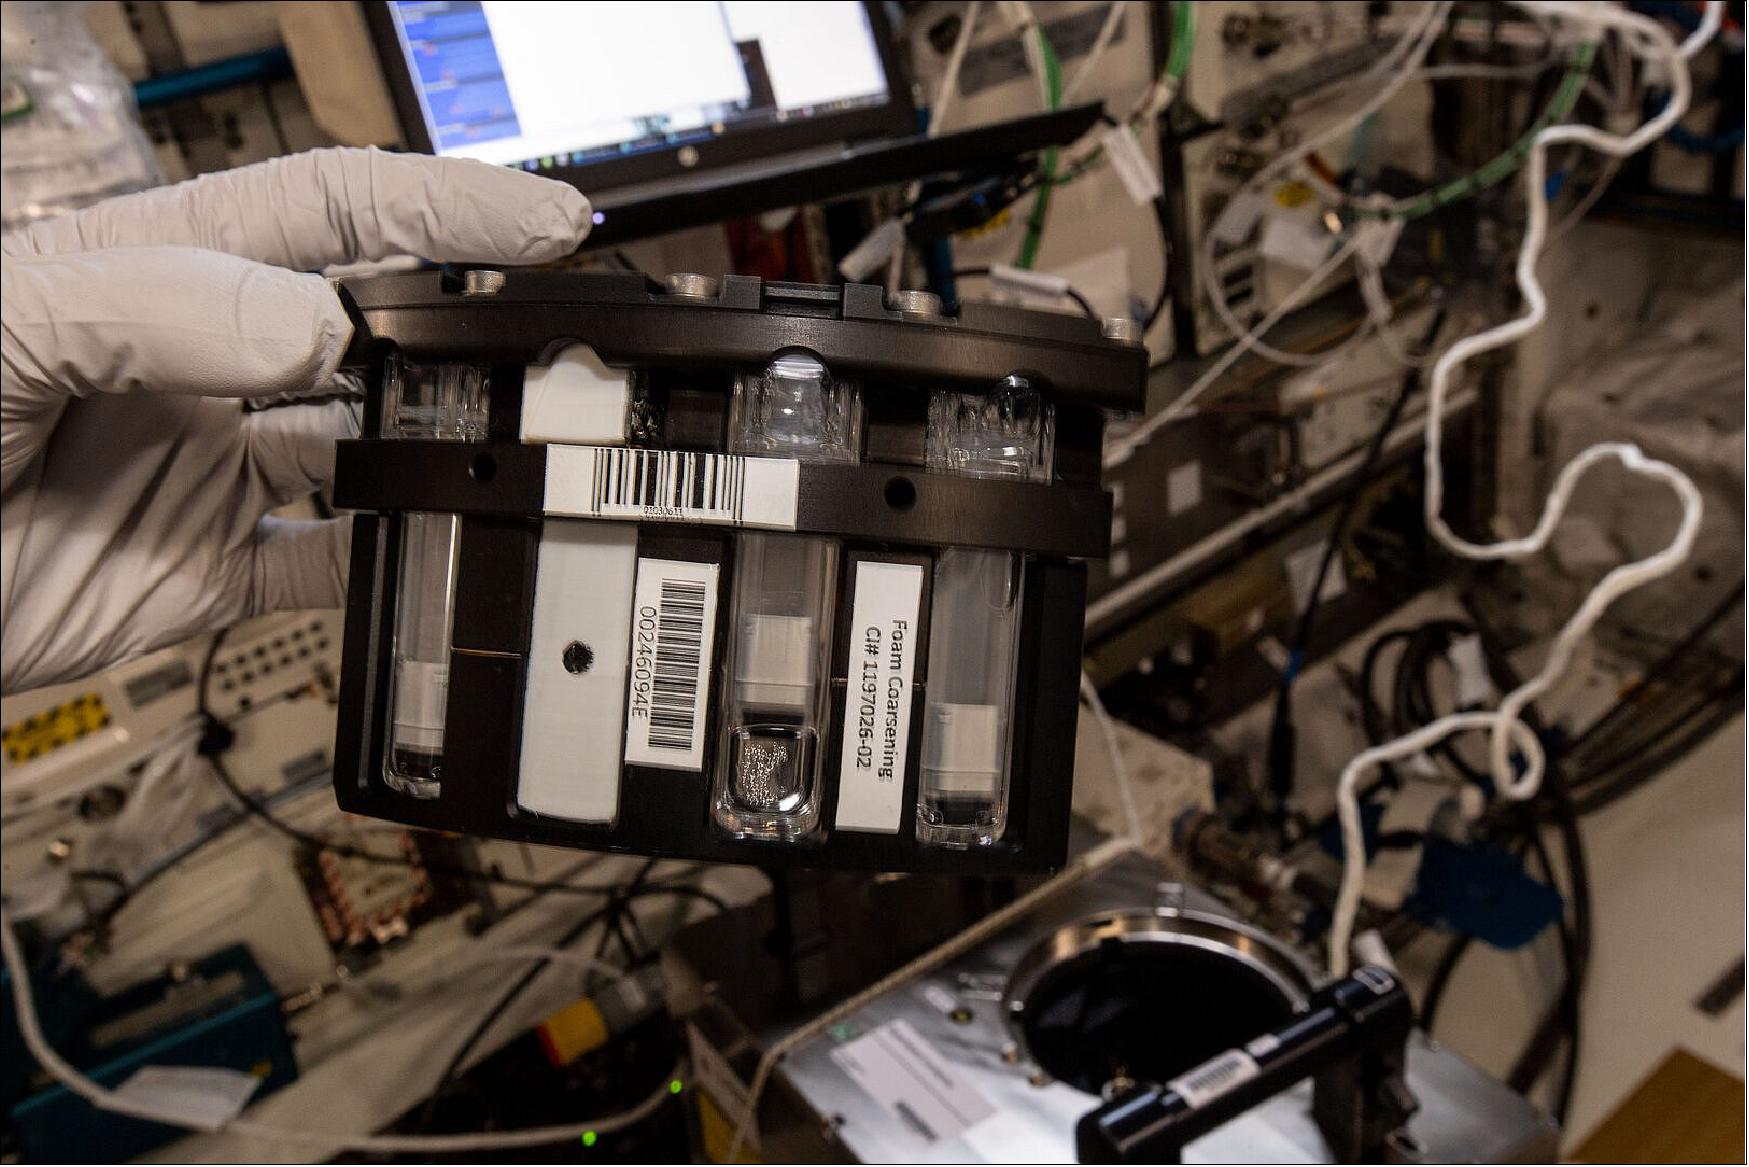 Figure 1: NASA astronaut Jessica Meir installed the experiment in the Fluid Science Laboratory on 6 March 2020 after removing the Multiscale boiling experiment known as Rubi. The experiment is controlled and data collected by the Belgian User Operations Center in Brussels, Belgium (image credit: NASA)